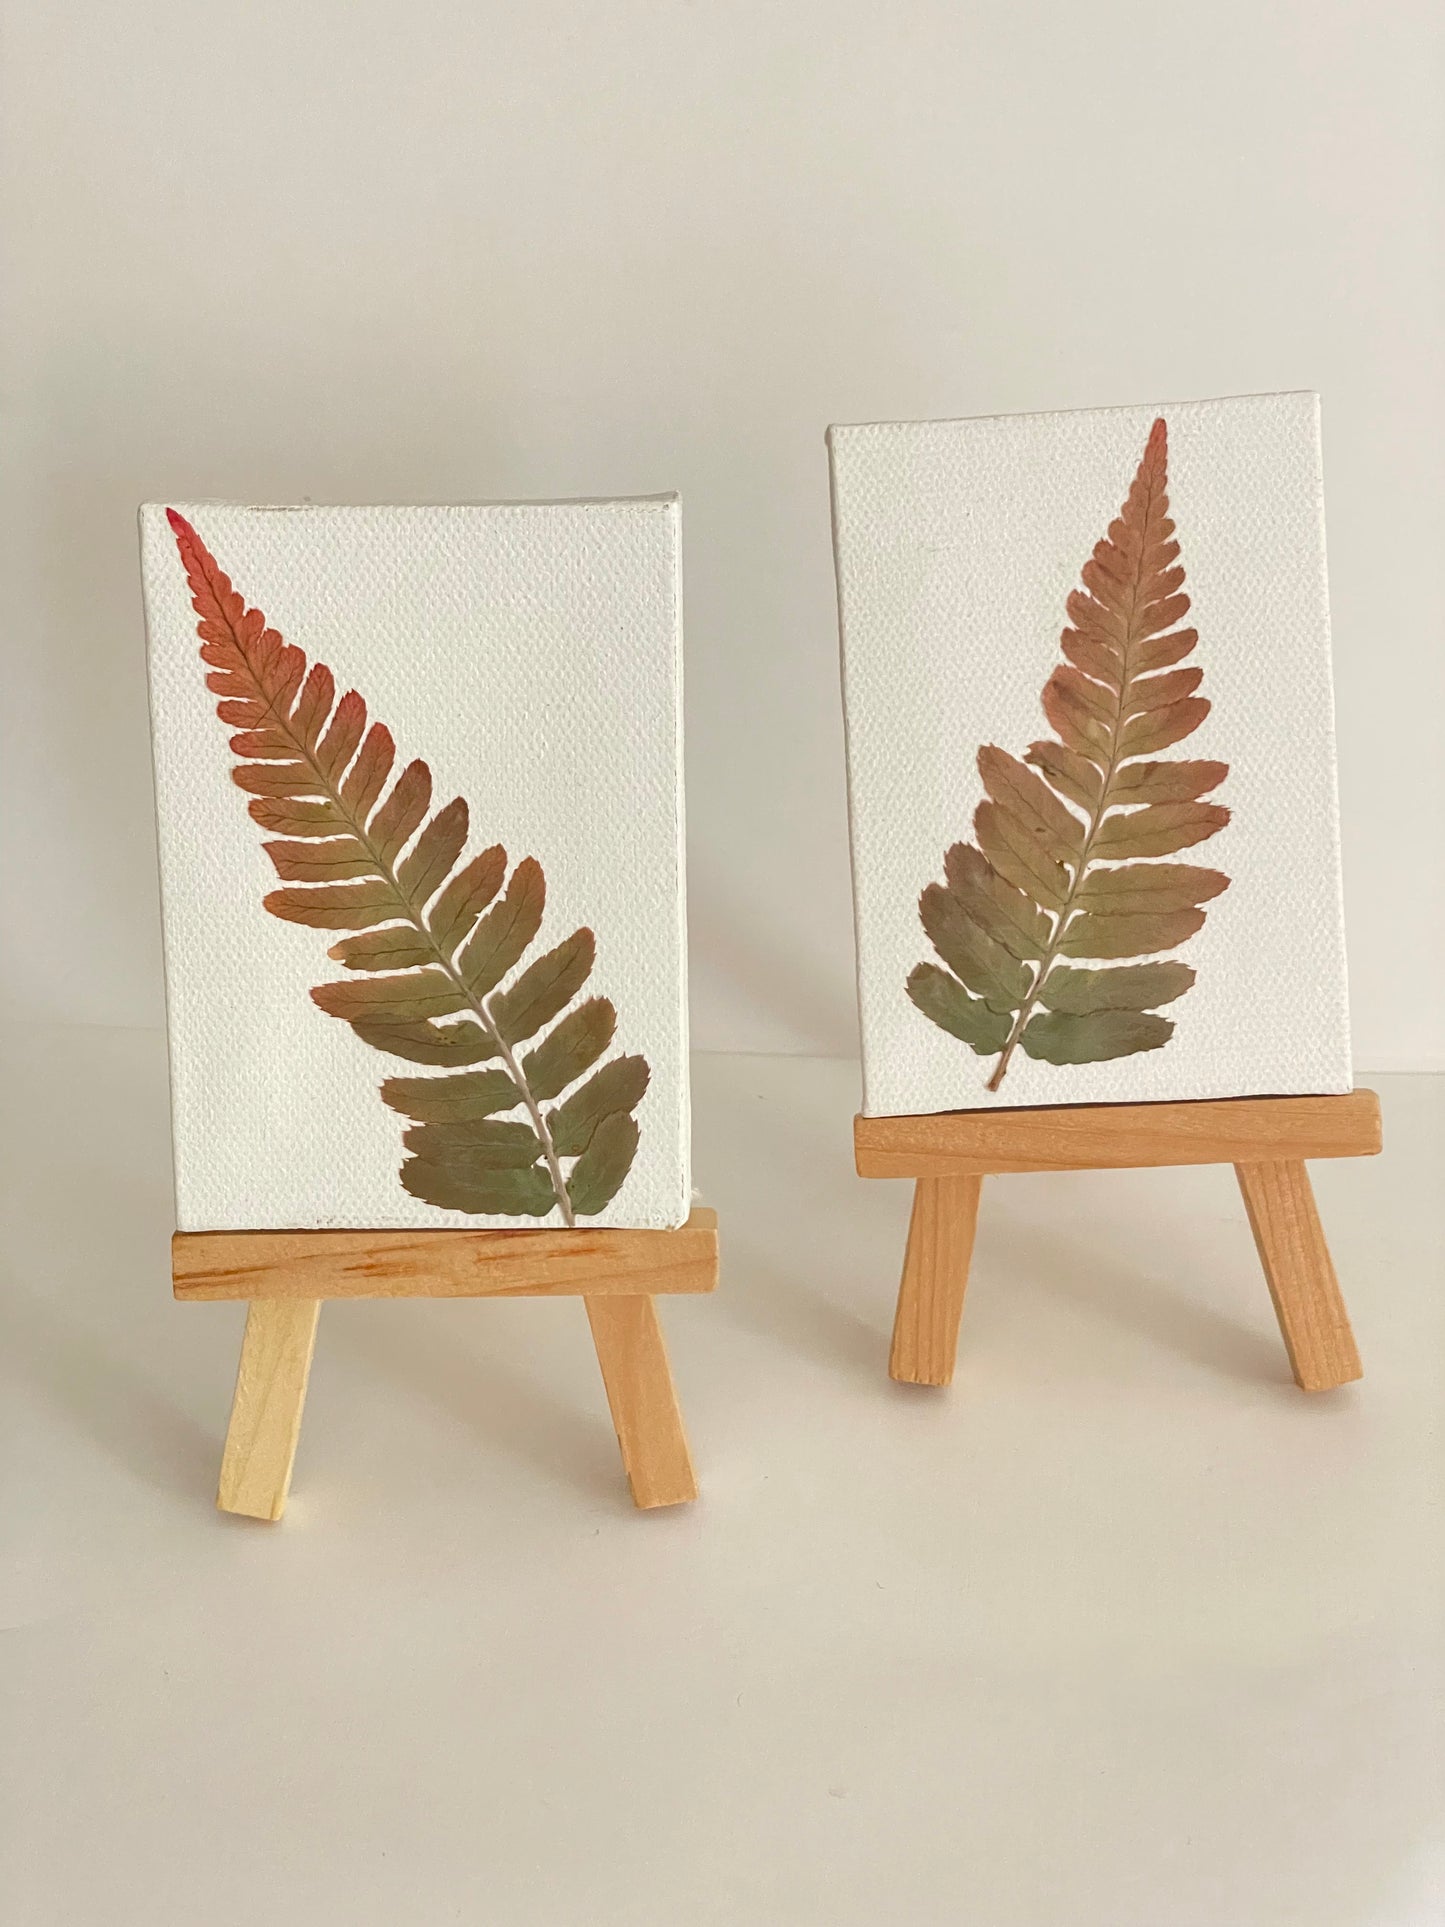 Pressed Japanese Painted Fern #2 on Mini Canvas with Easel